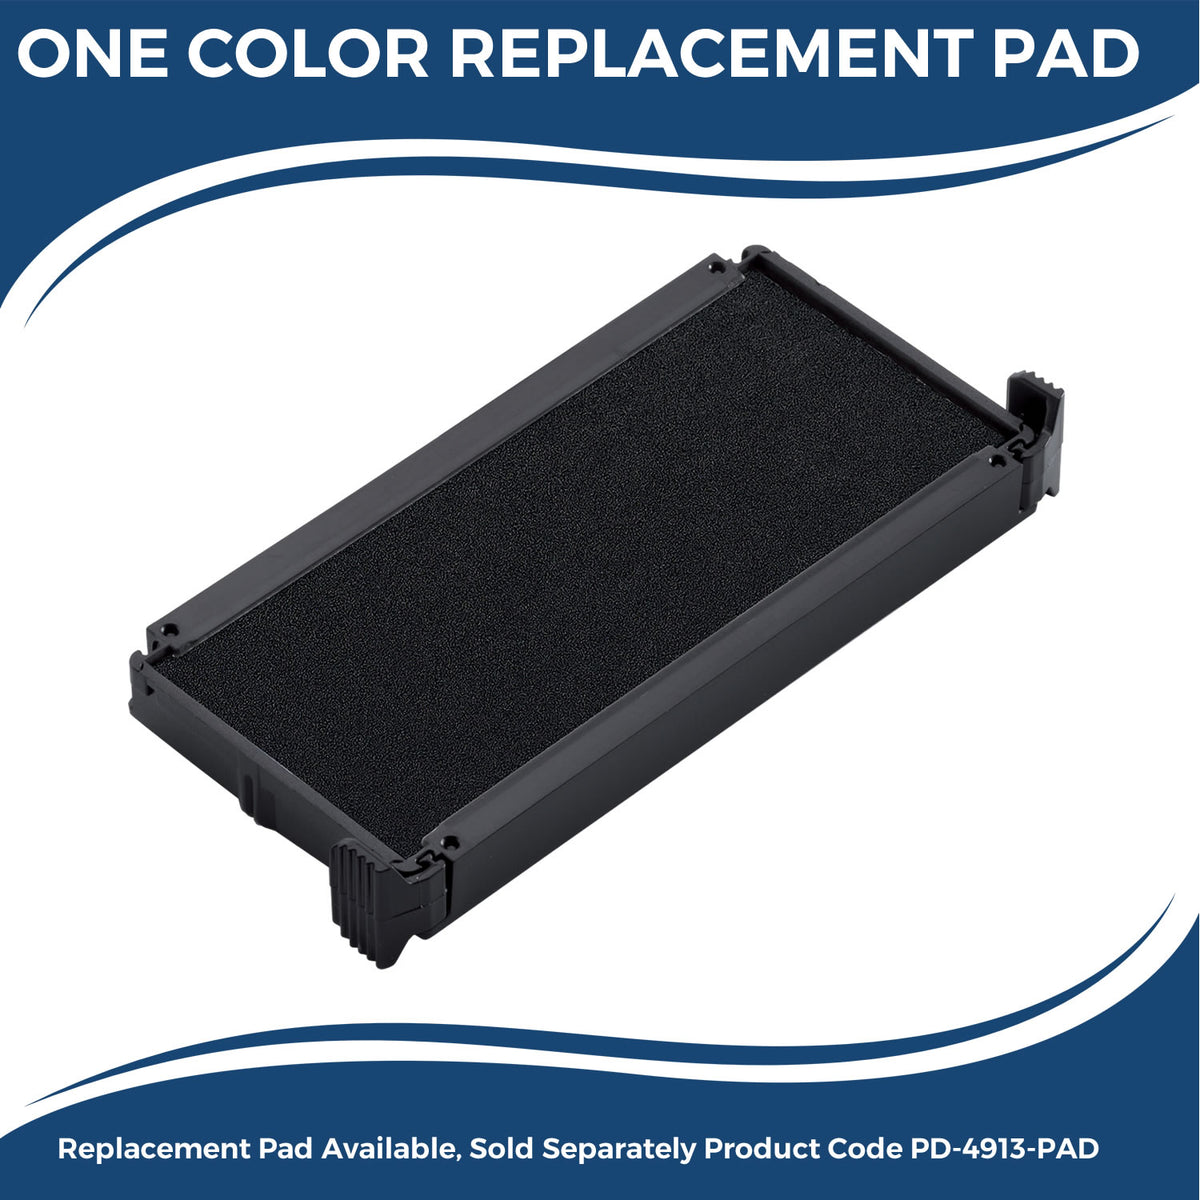 Large Self-Inking Client&#39;s Copy Stamp 4861S Large Replacment Pad